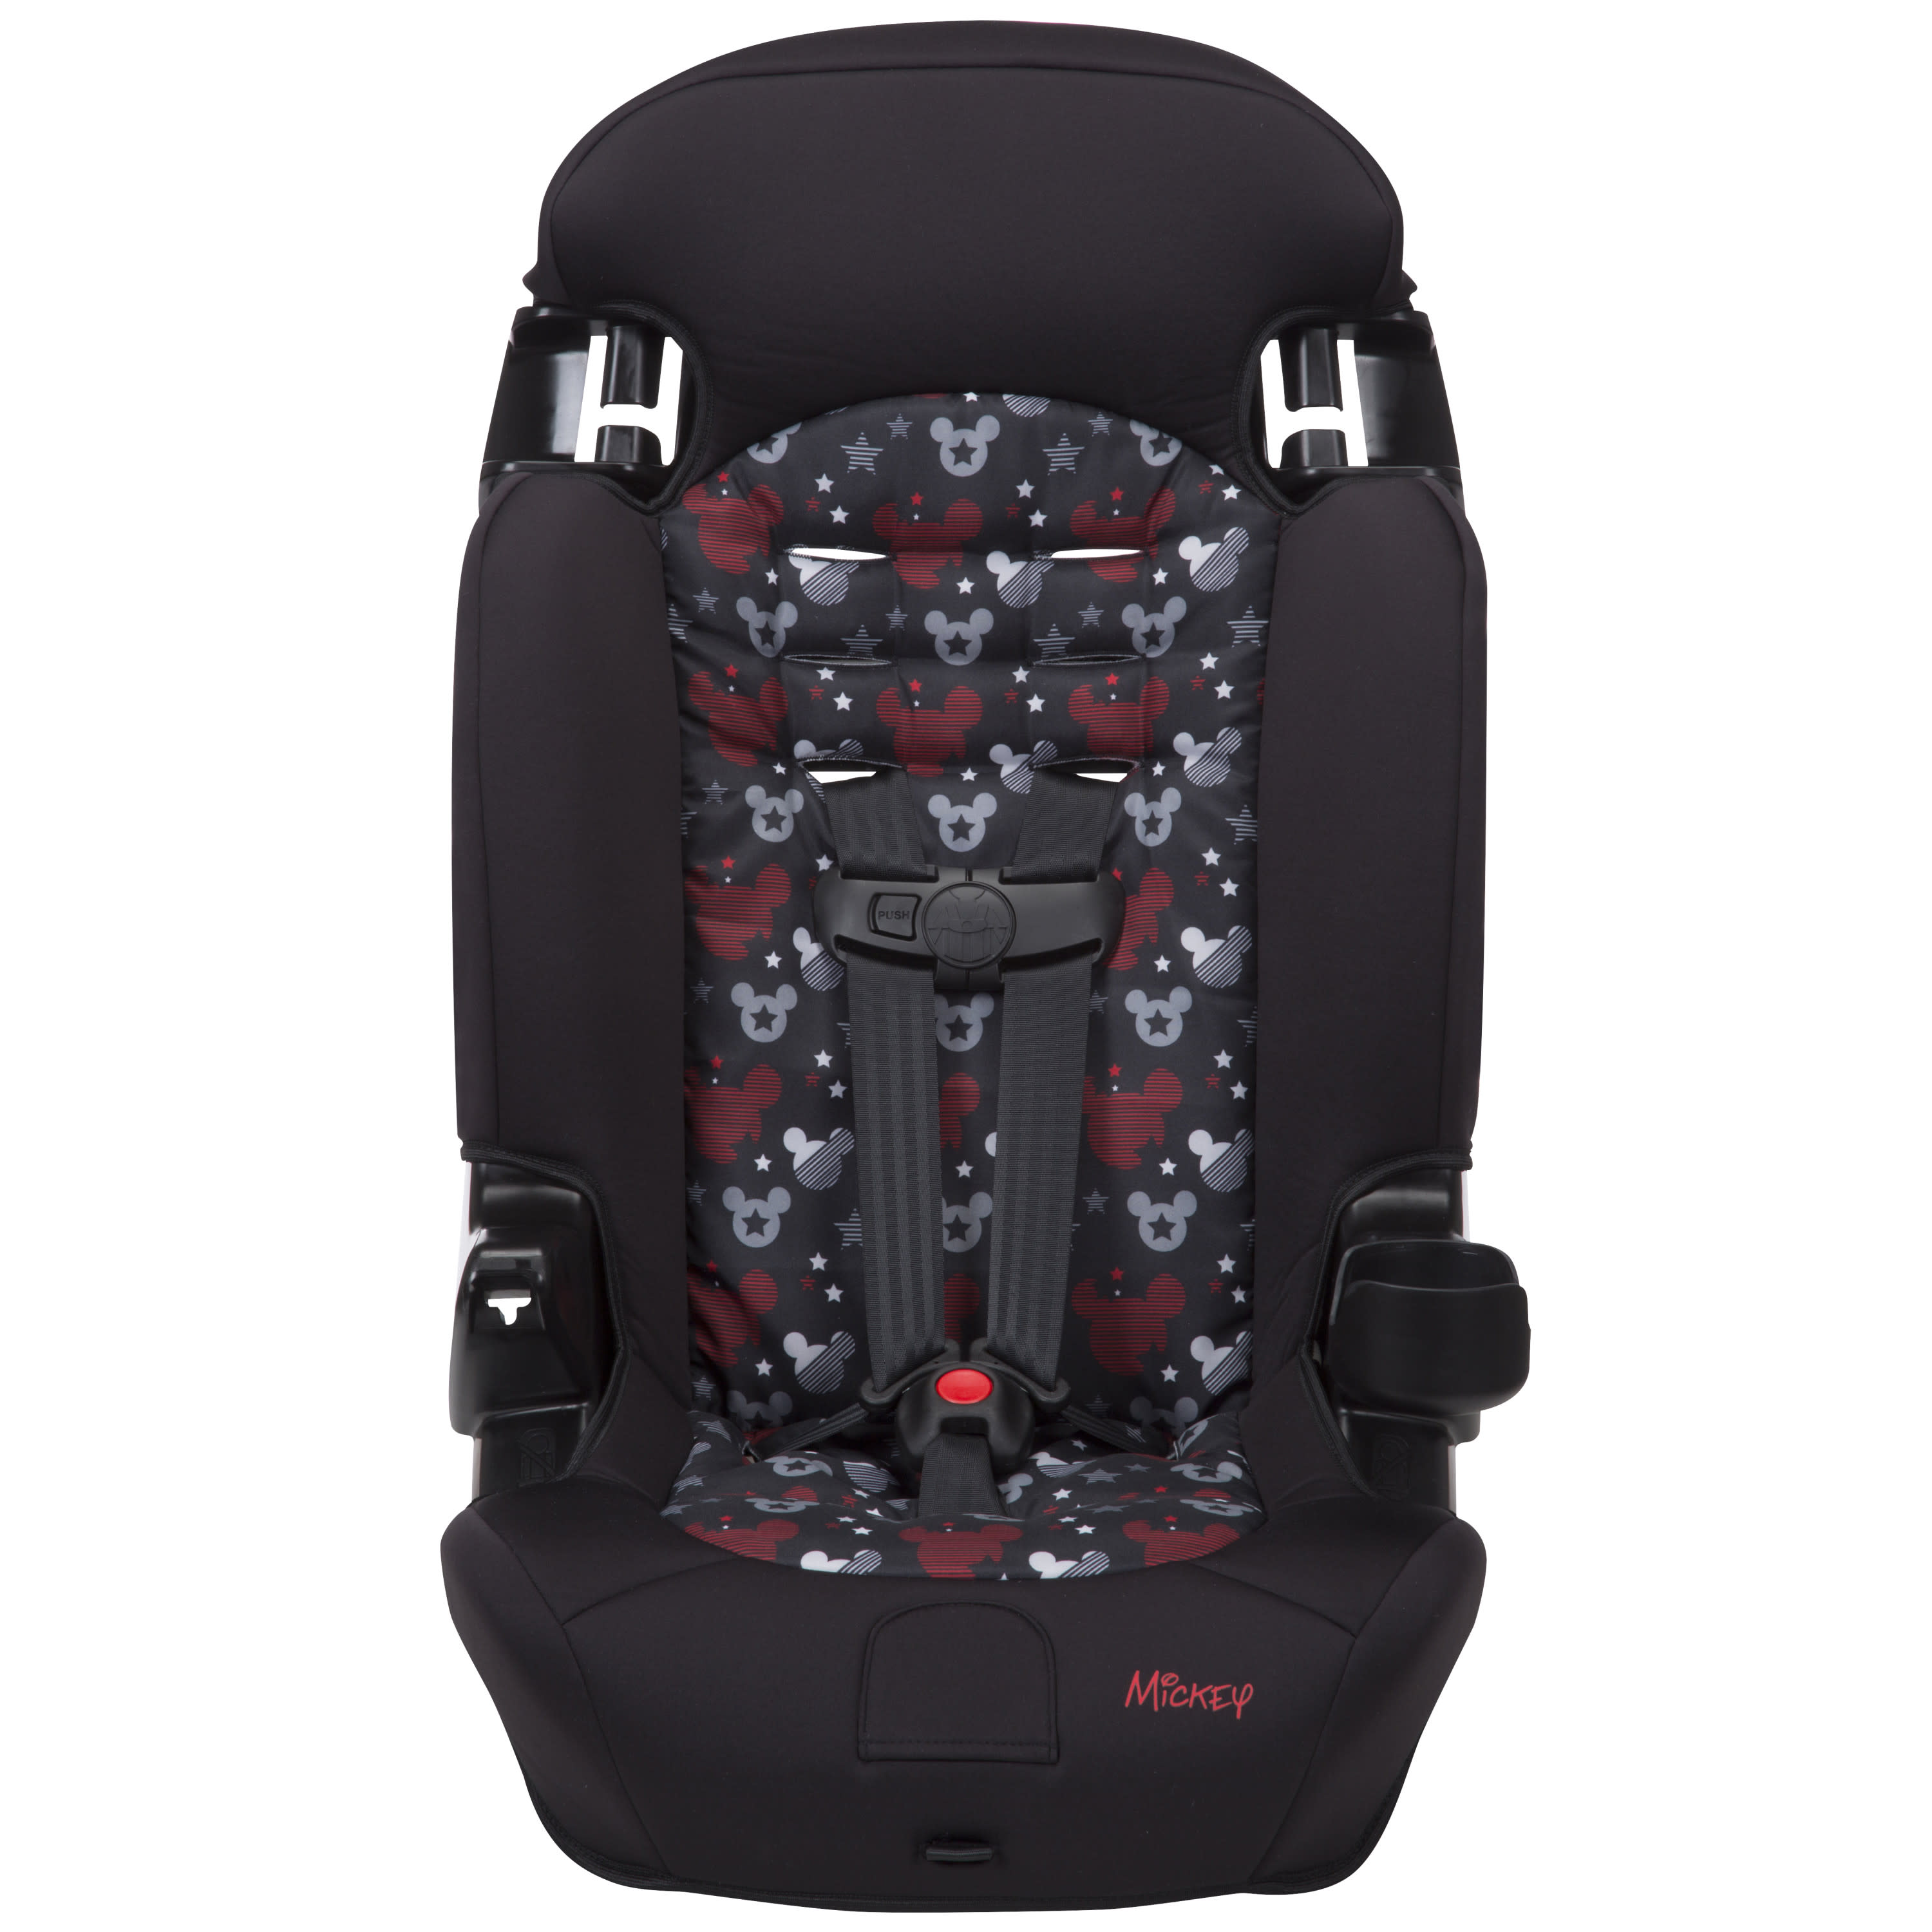 Disney Baby Finale 2-in-1 Booster Car Seat, Outta This World - image 4 of 14